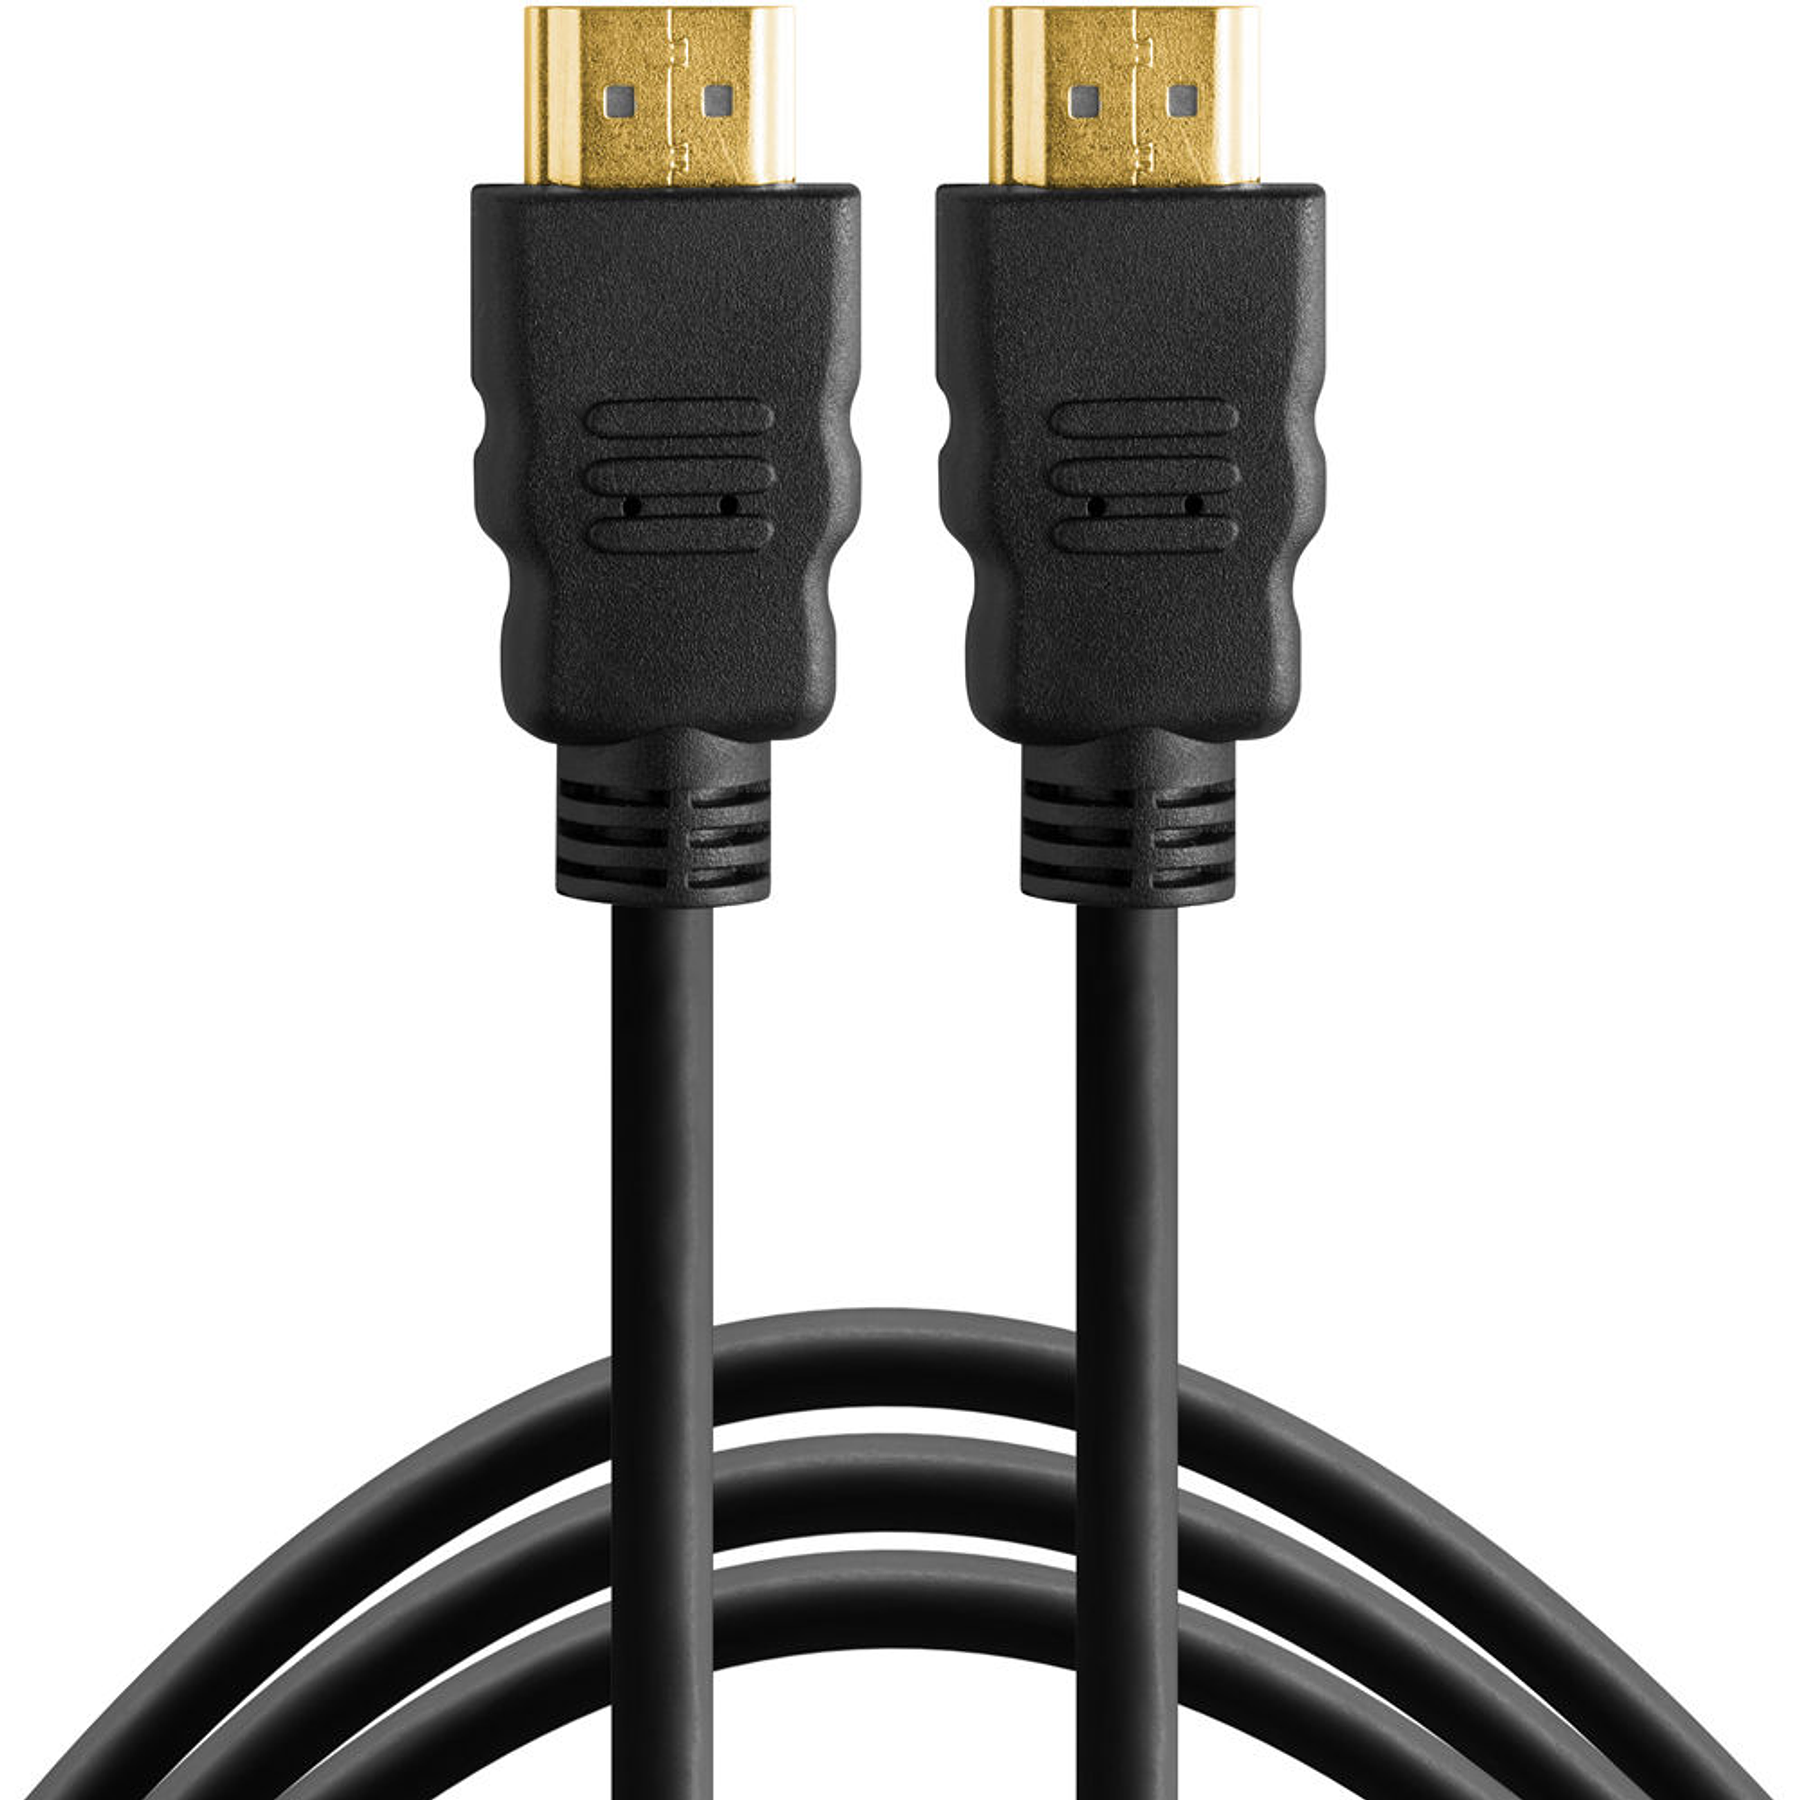 Tether Tools Pro HDMI to HDMI 4.6 mts